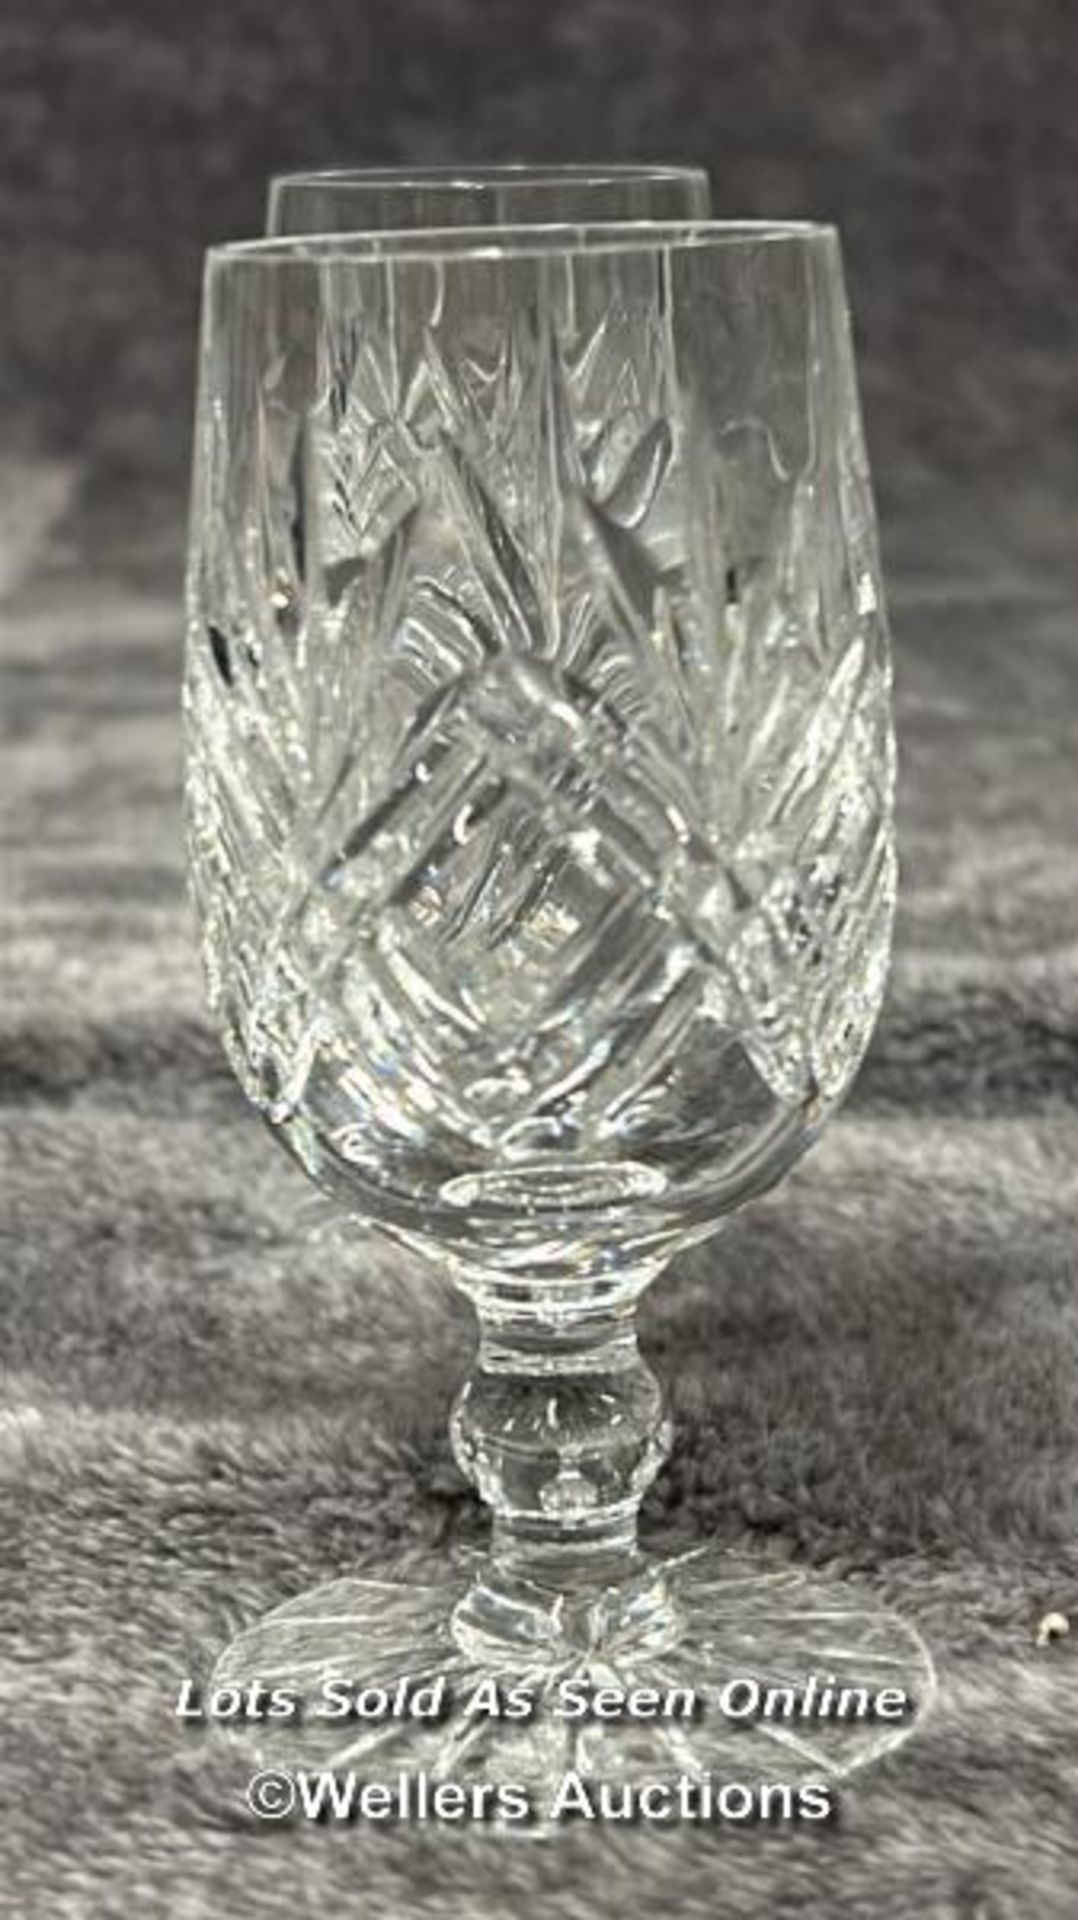 Six lead crystal Port glasses in good condition / AN8 - Image 2 of 2